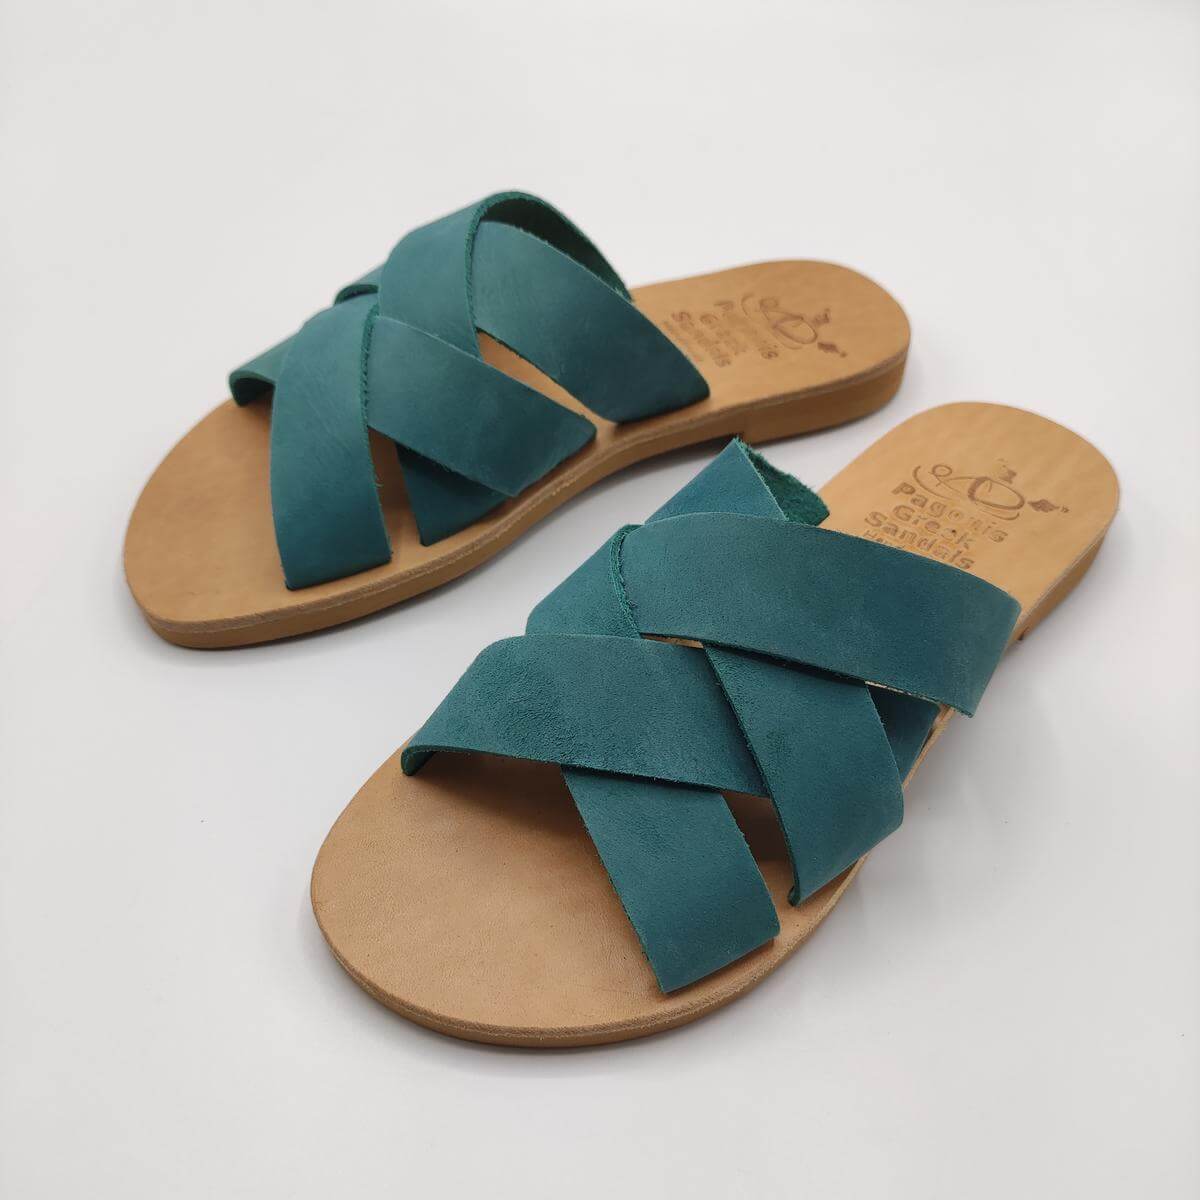 Criss Cross Woven Leather Slides Pagonis Nubuck Ciel